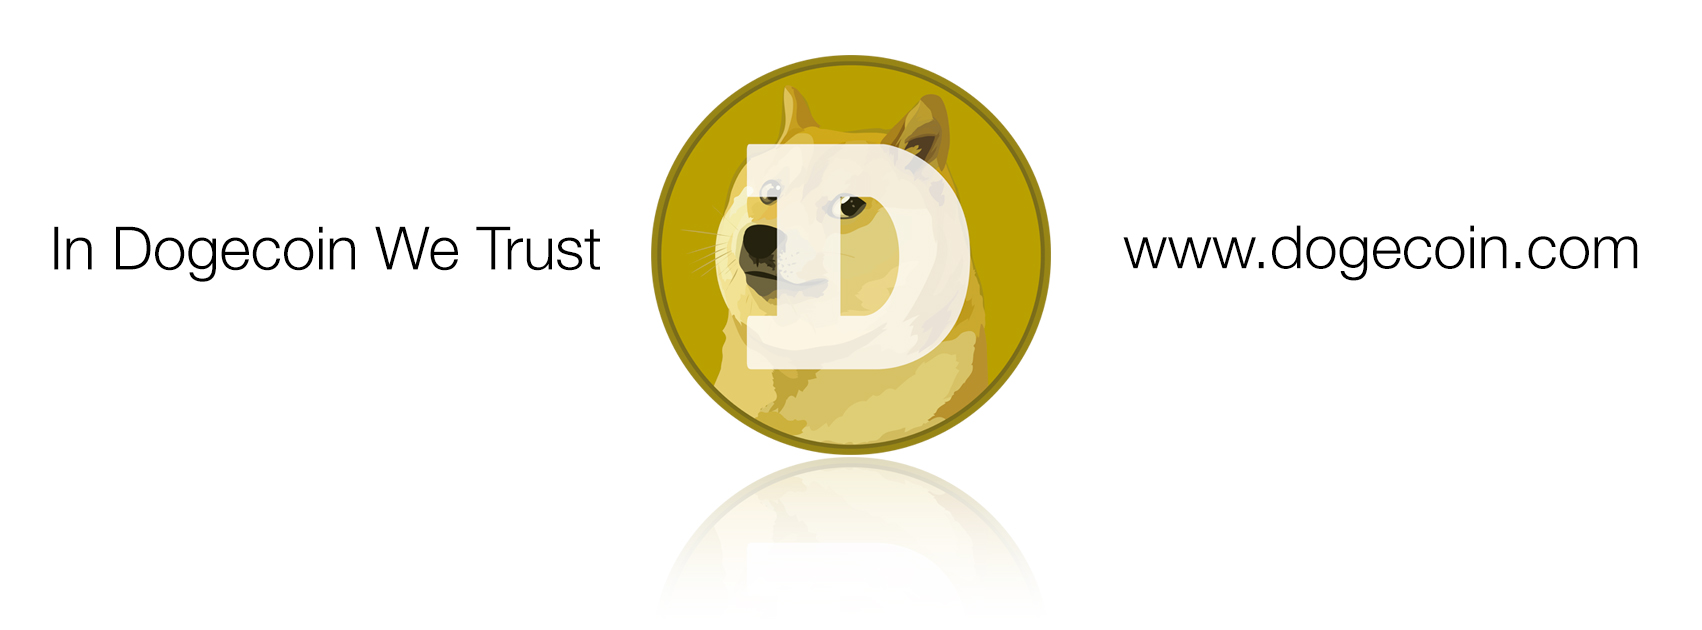 In Dogecoin We Trust Facebook Cover Image